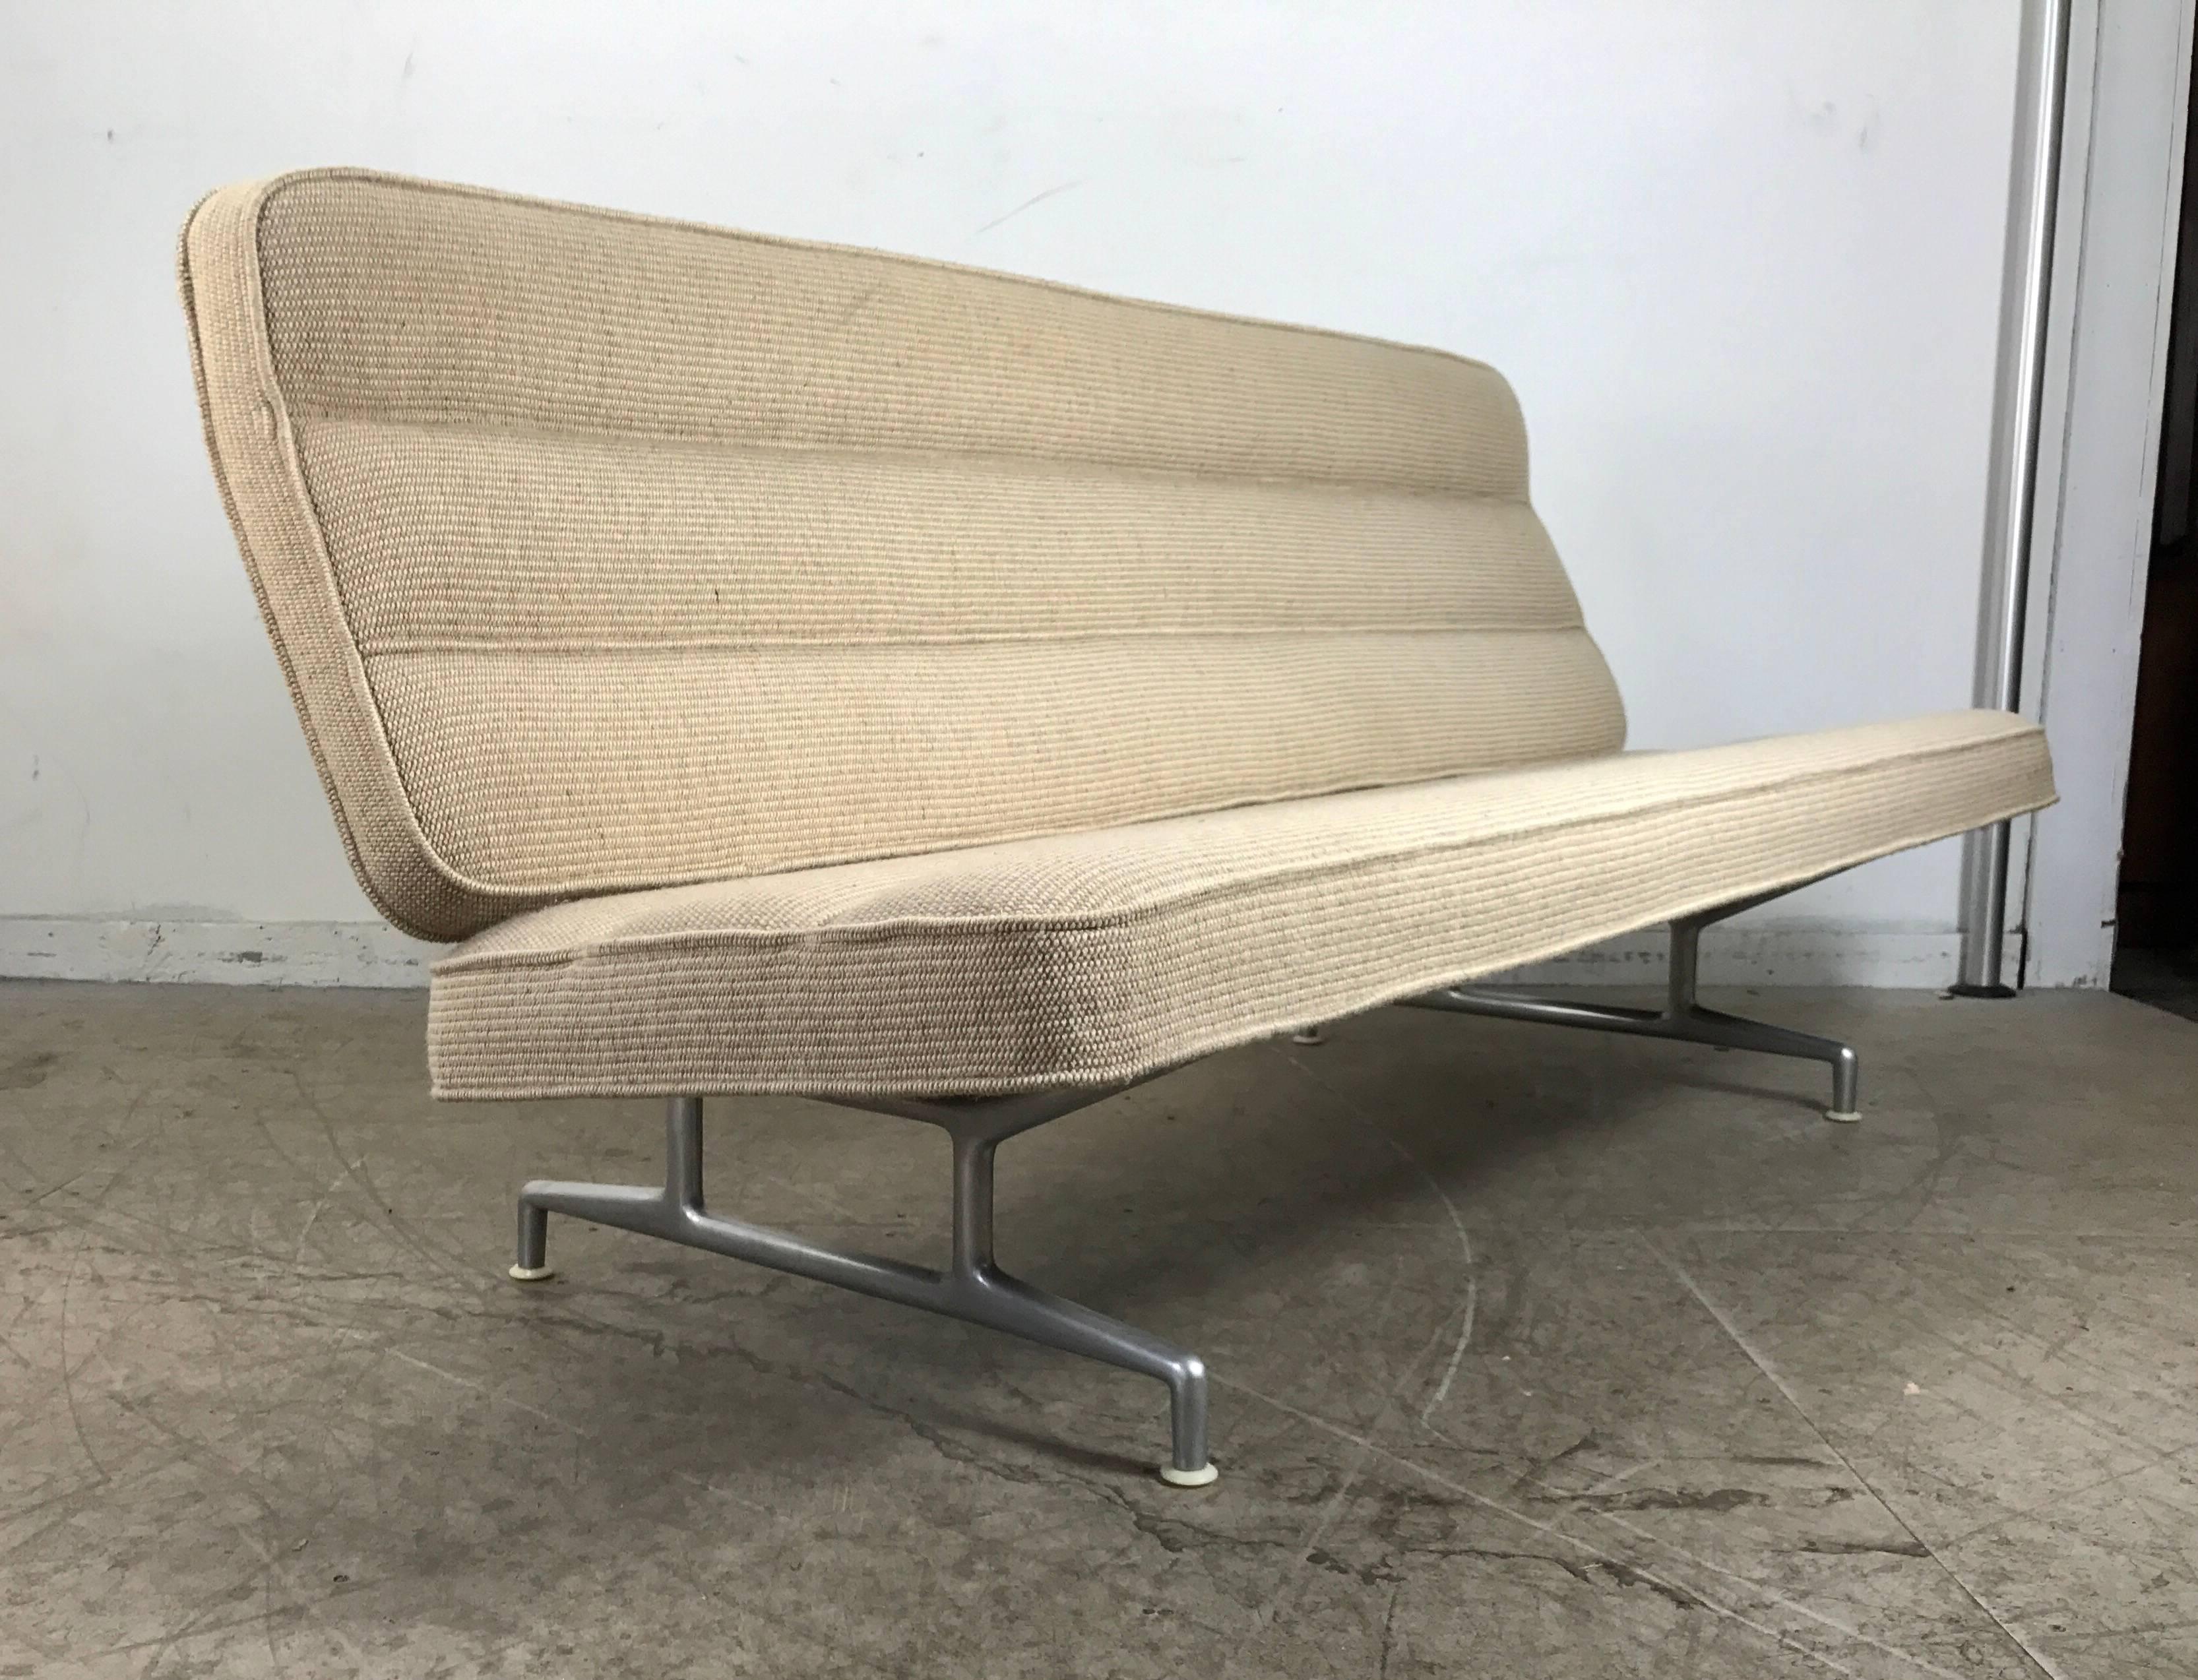 Rare 3473 sofa by Charles Eames. Retains original oatmeal color wool fabric, showroom condition! No sag, puckering etc. Cast aluminium frame, Channeled back and seat. Produced only from 1964-1973. Made by Herman Miller. Stylish and extremely